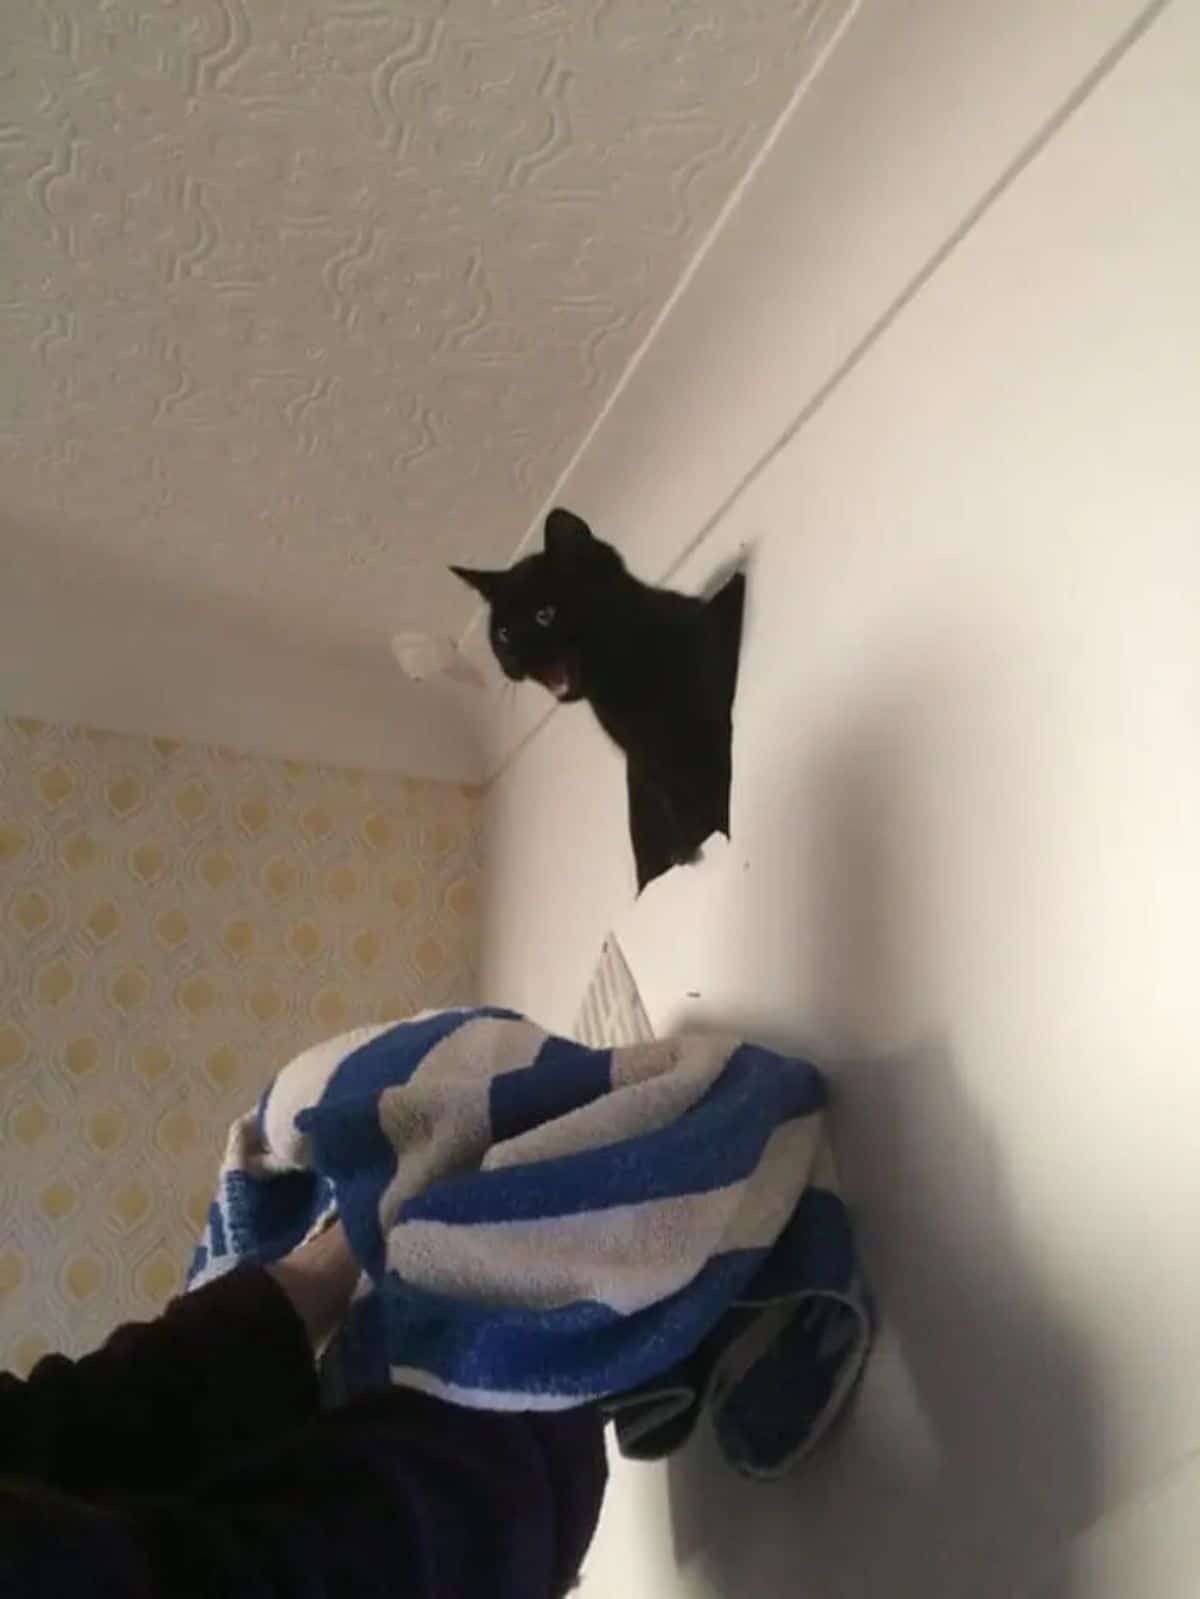 black cat coming out of a vent in a white wall with its mouth open and someone holding a blue and white blanket under it